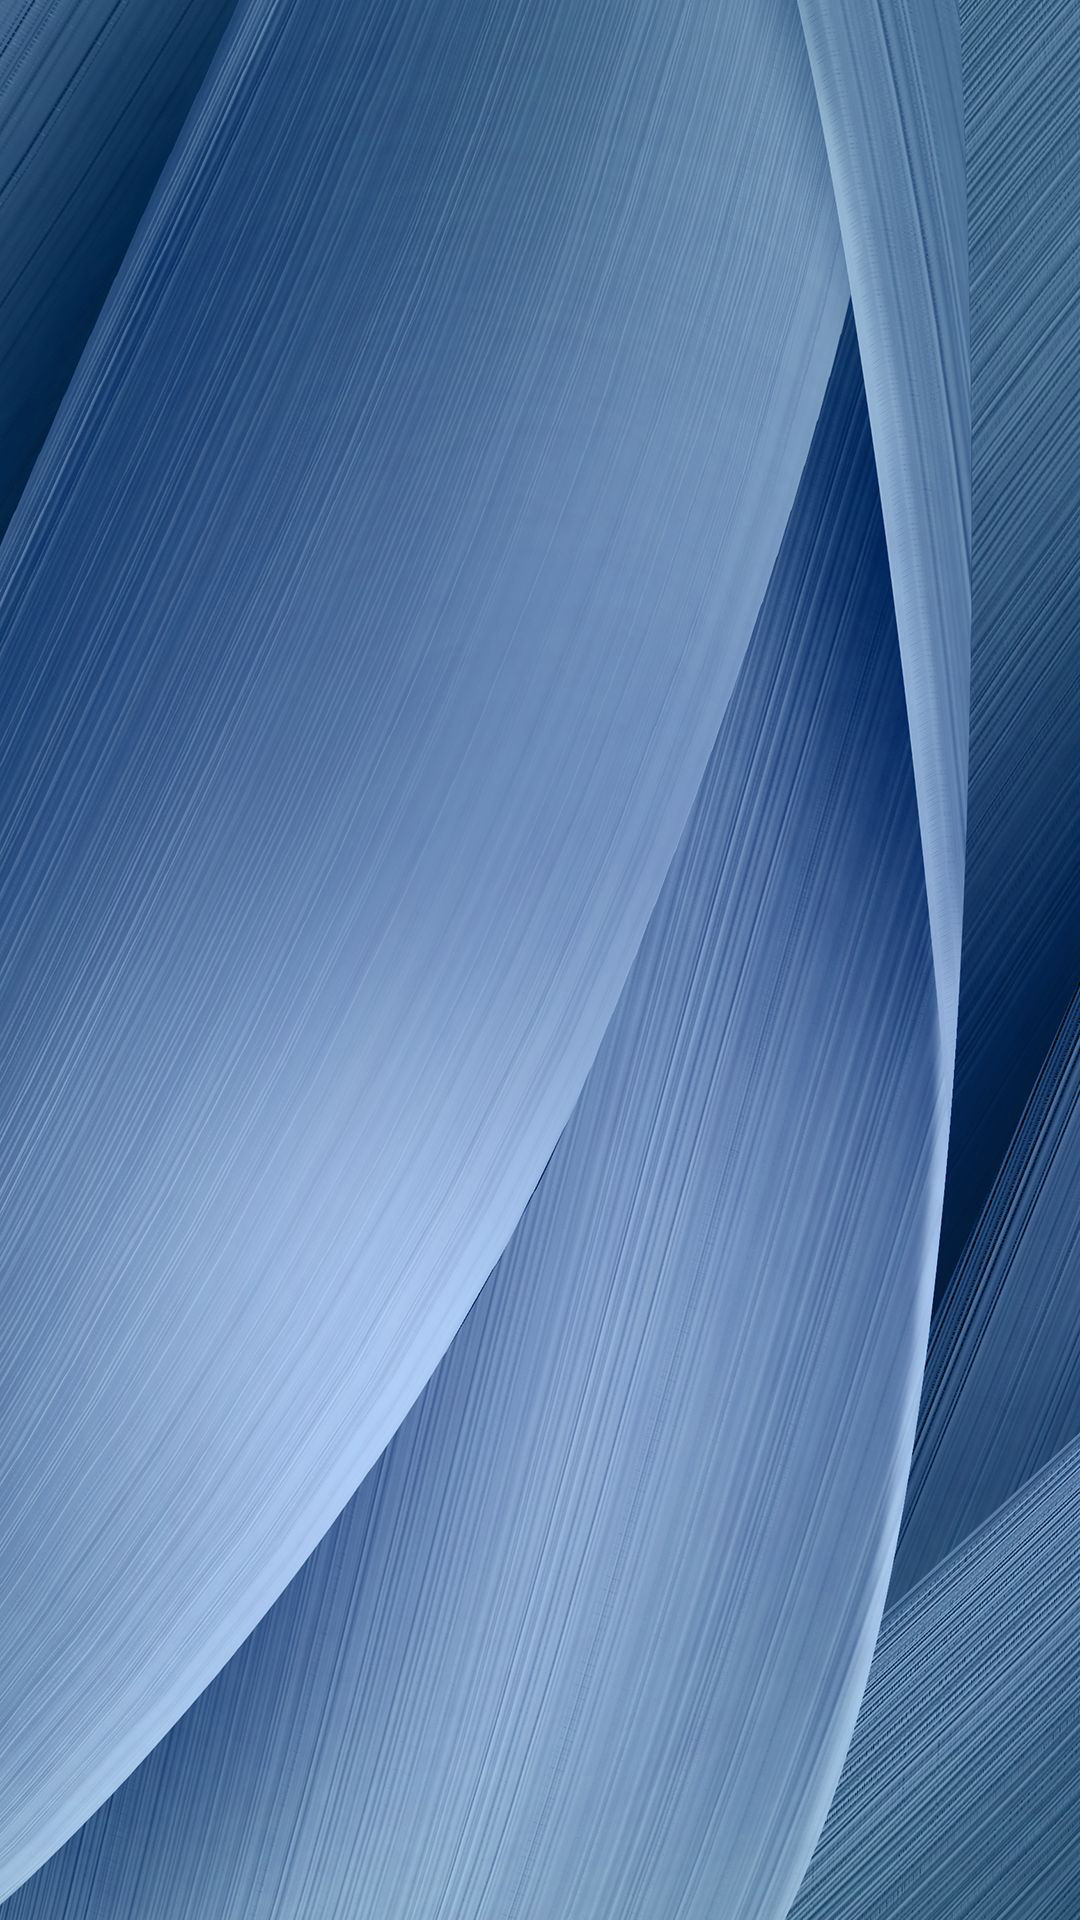 Dark Solid Blue Color teahub io iPhone Wallpapers Free Download